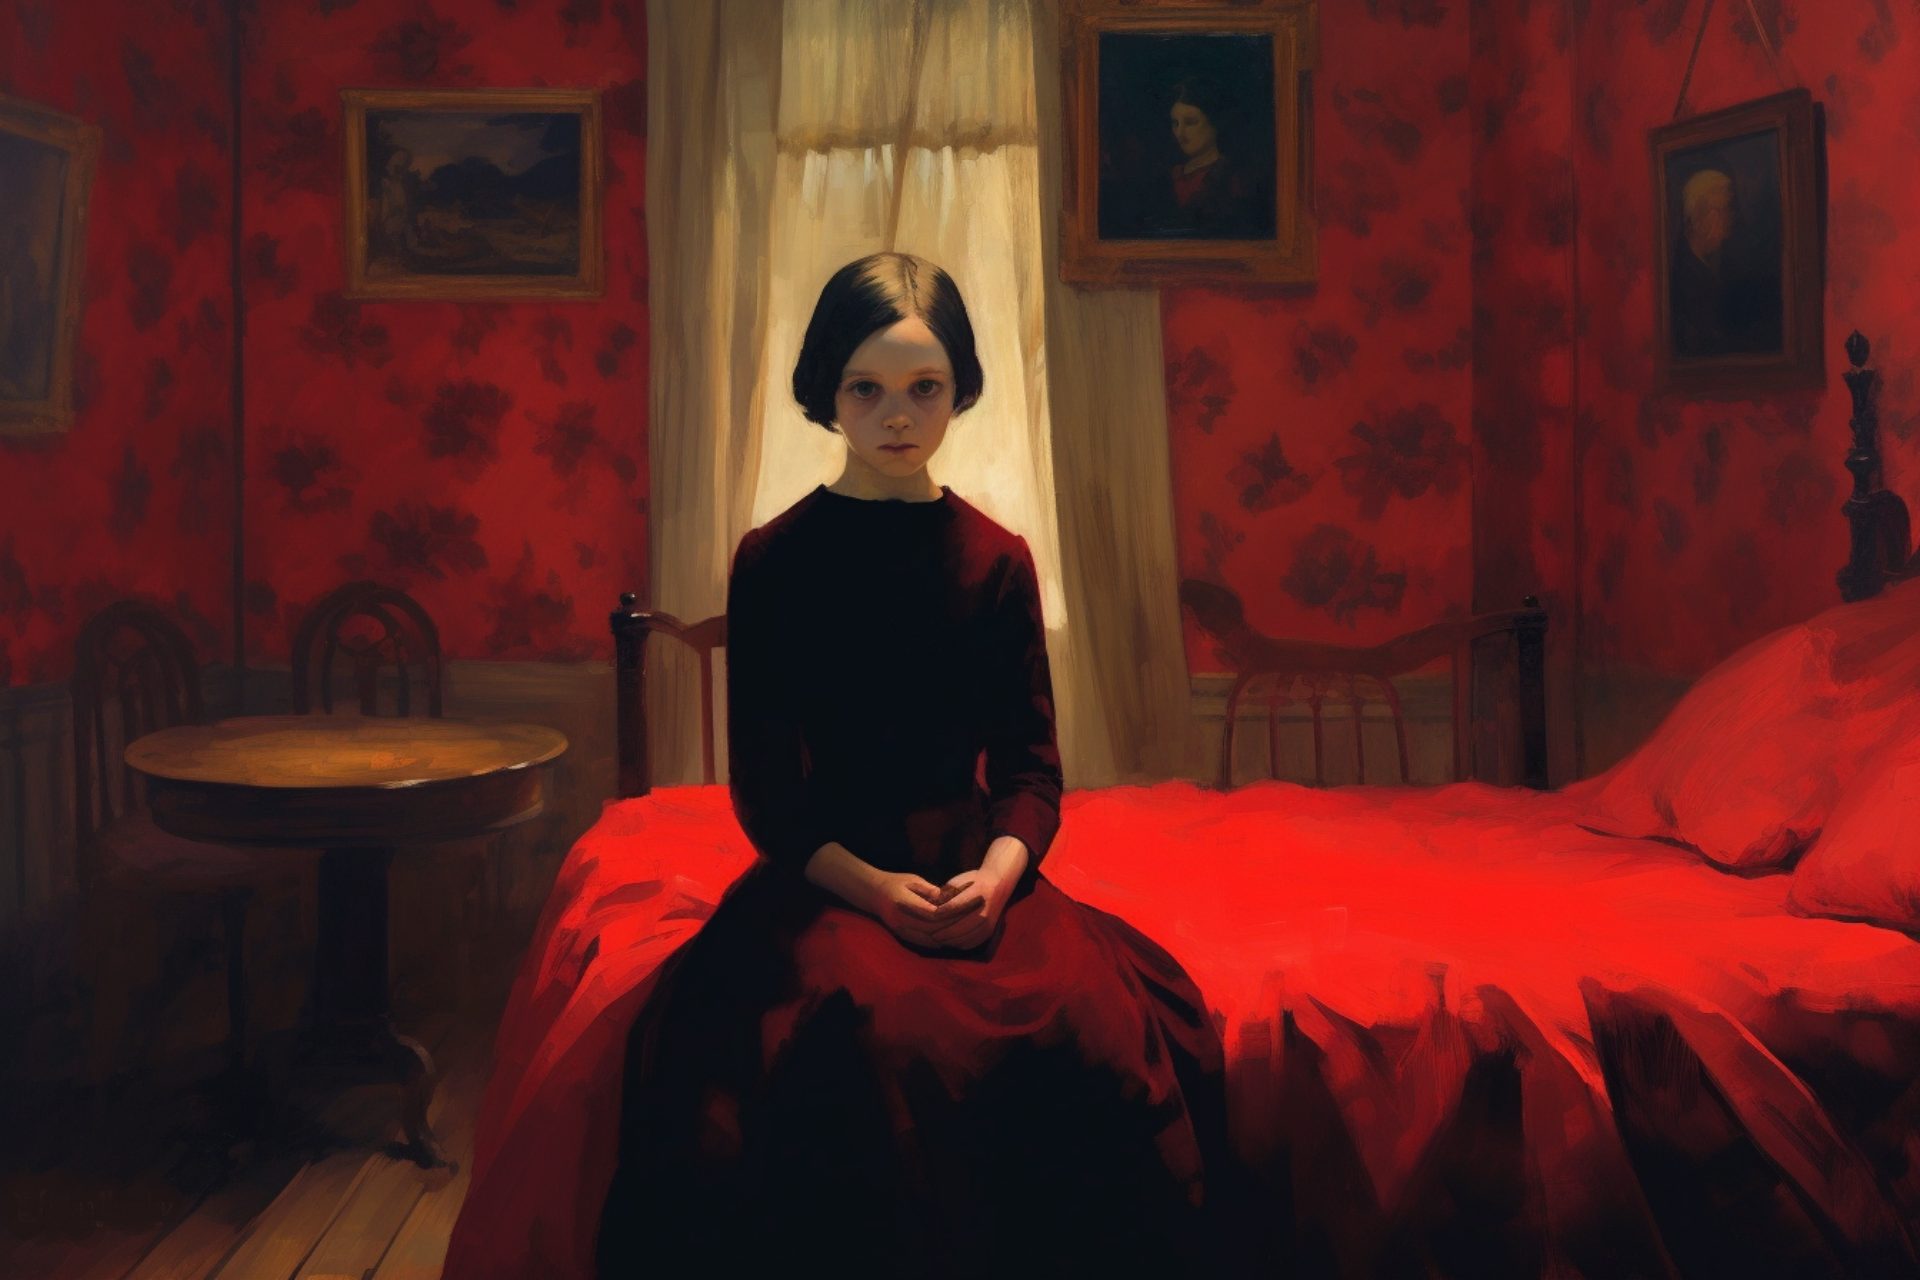 A sad-looking young girl wearing Victorian-era clothes is sitting on a red bed in a red room.